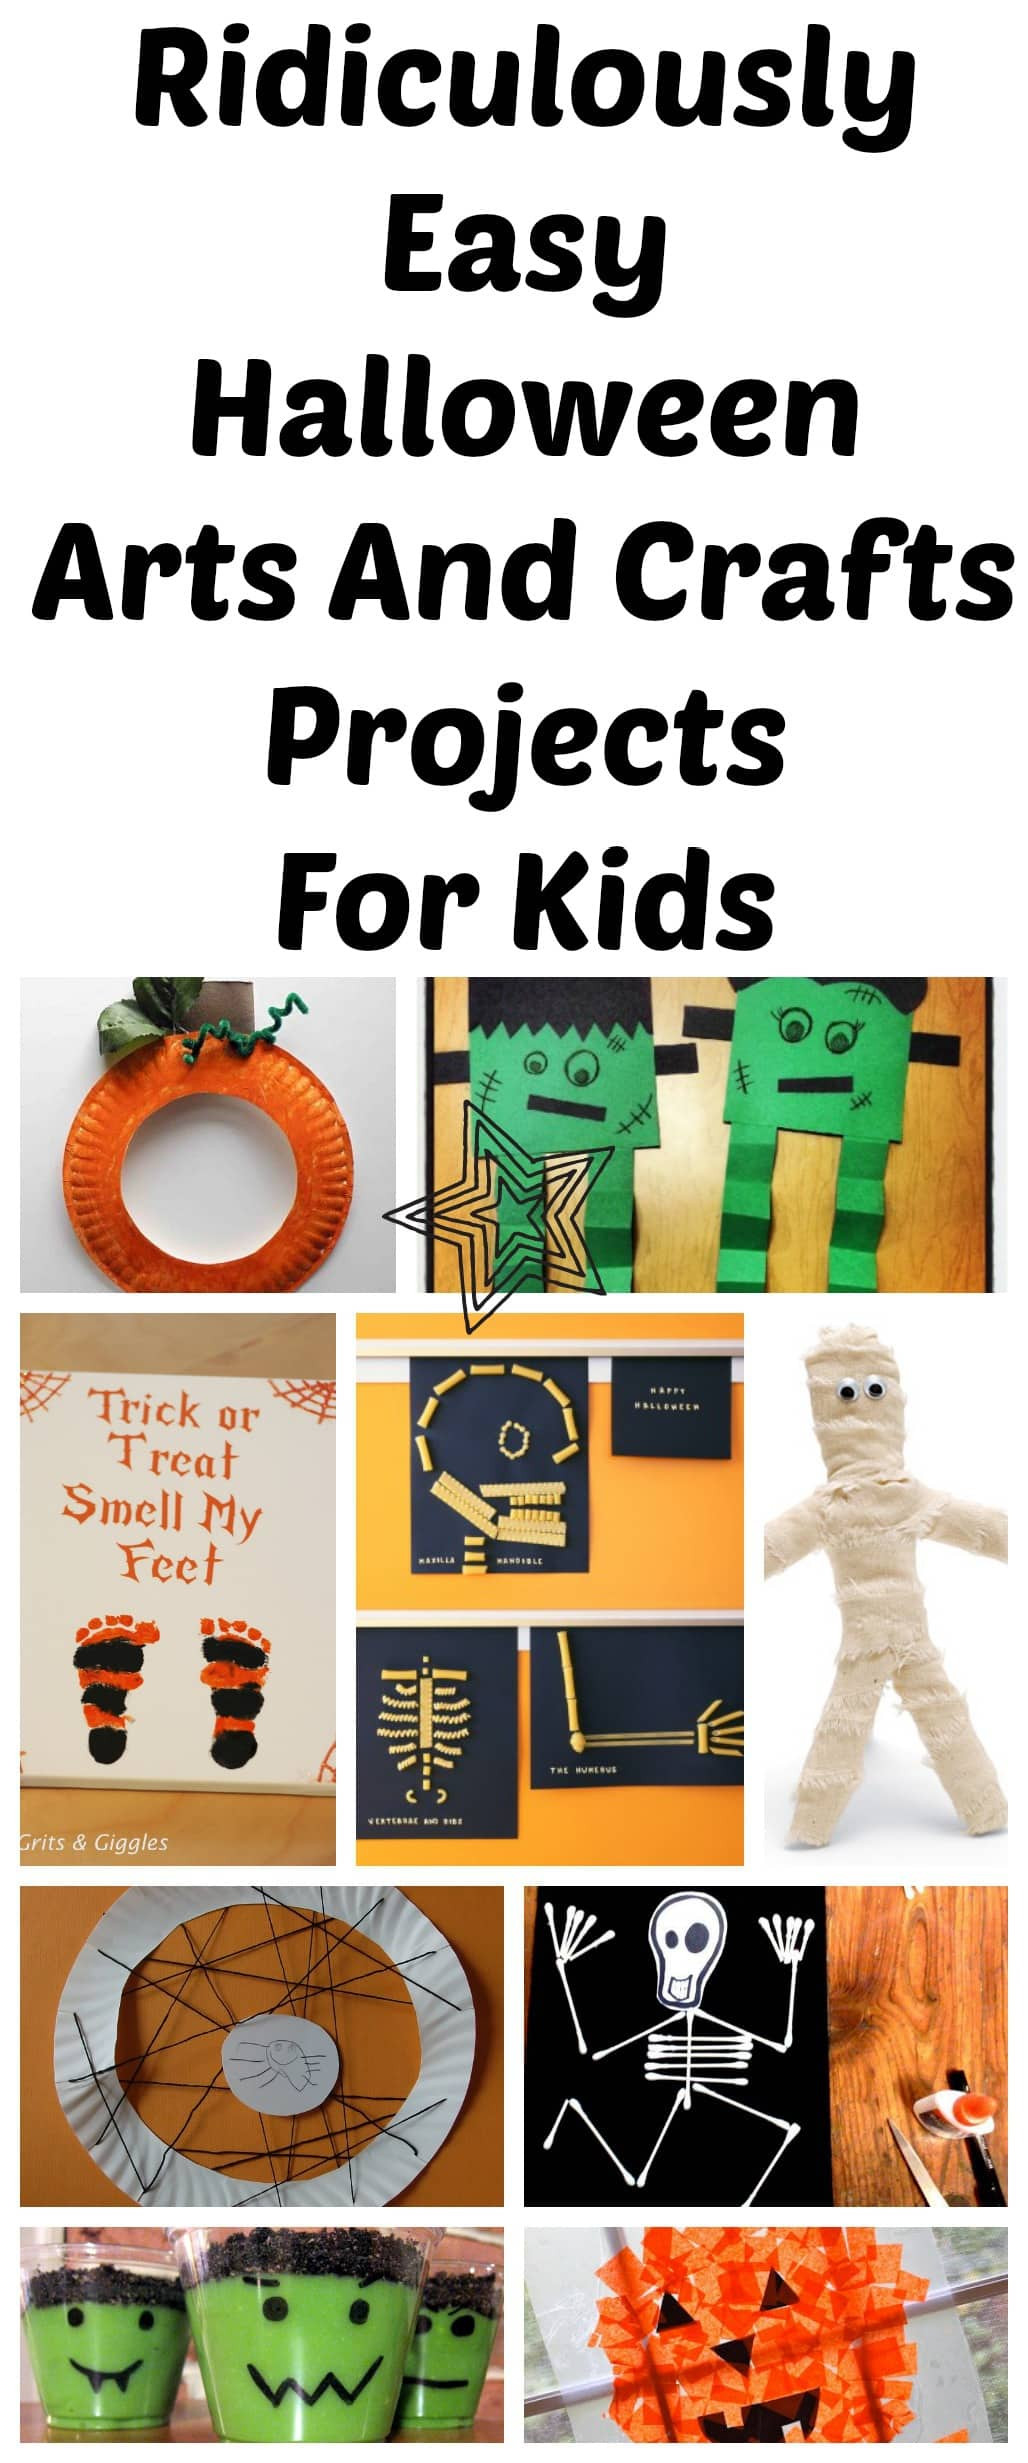 Toddler Arts And Craft Ideas
 10 Ridiculously Easy Halloween Arts And Crafts Projects To